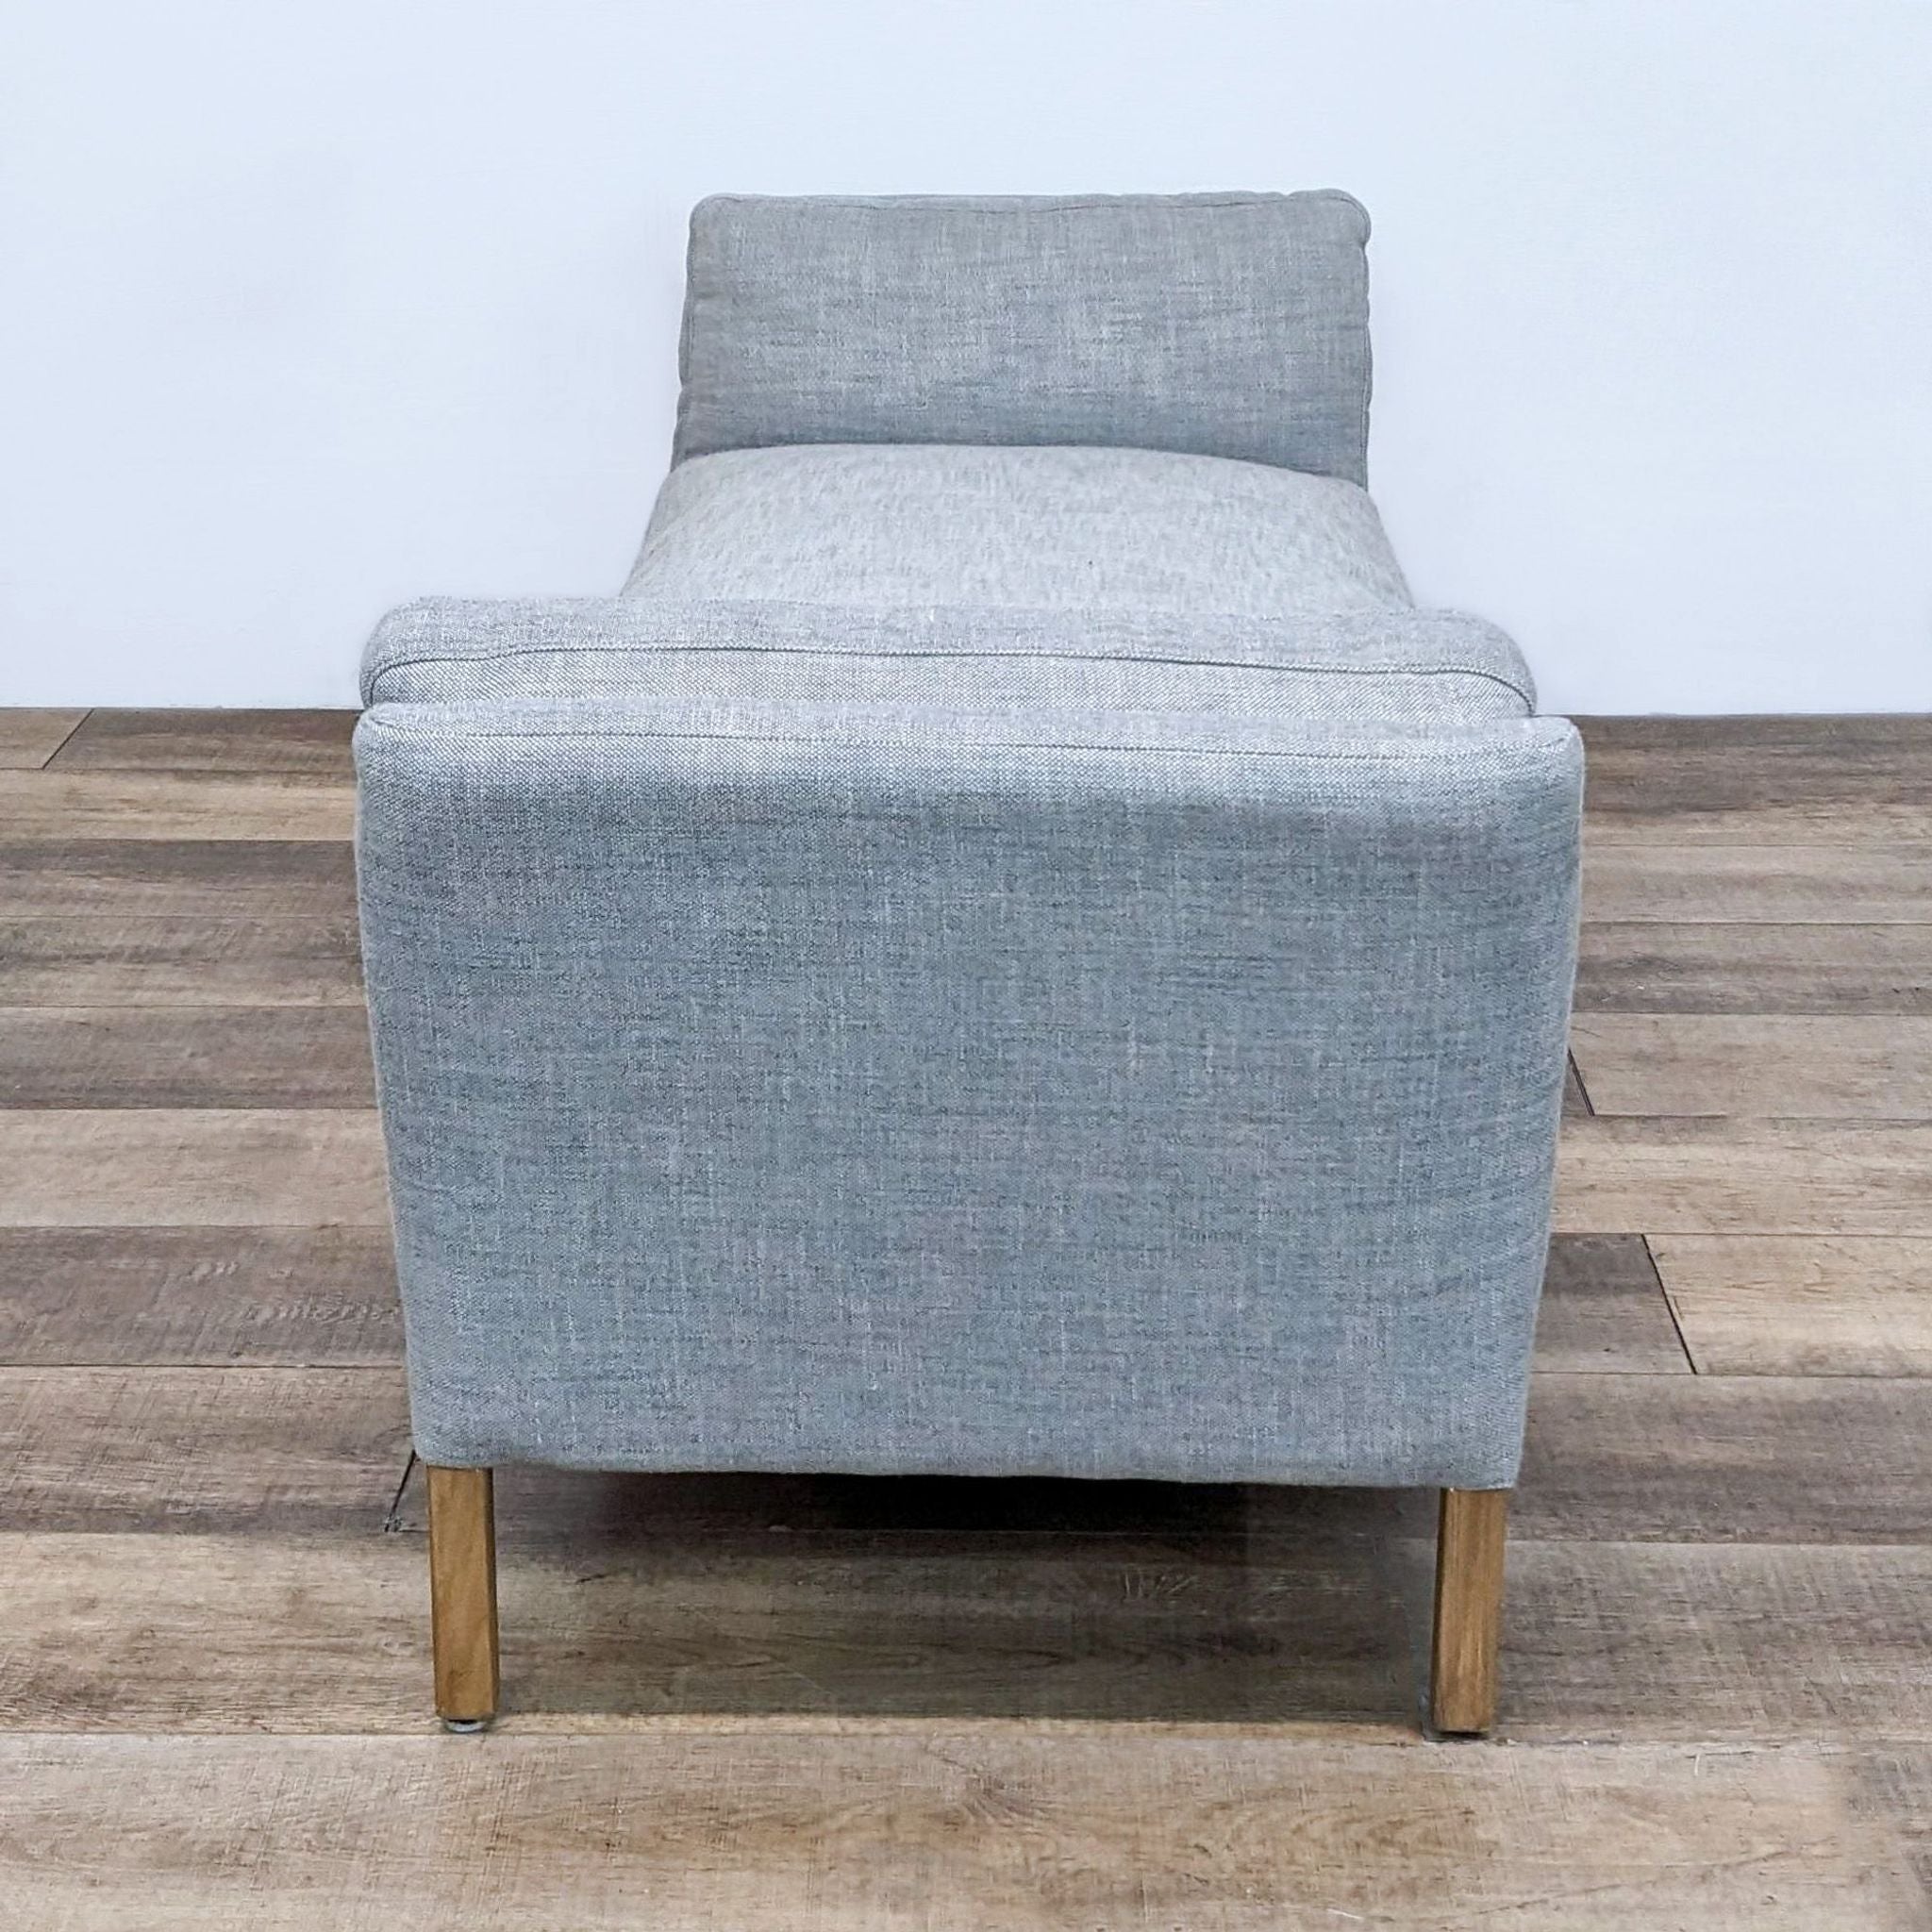 Restoration Hardware grey linen weave fabric bench with slope arms and wooden legs on a wooden floor.